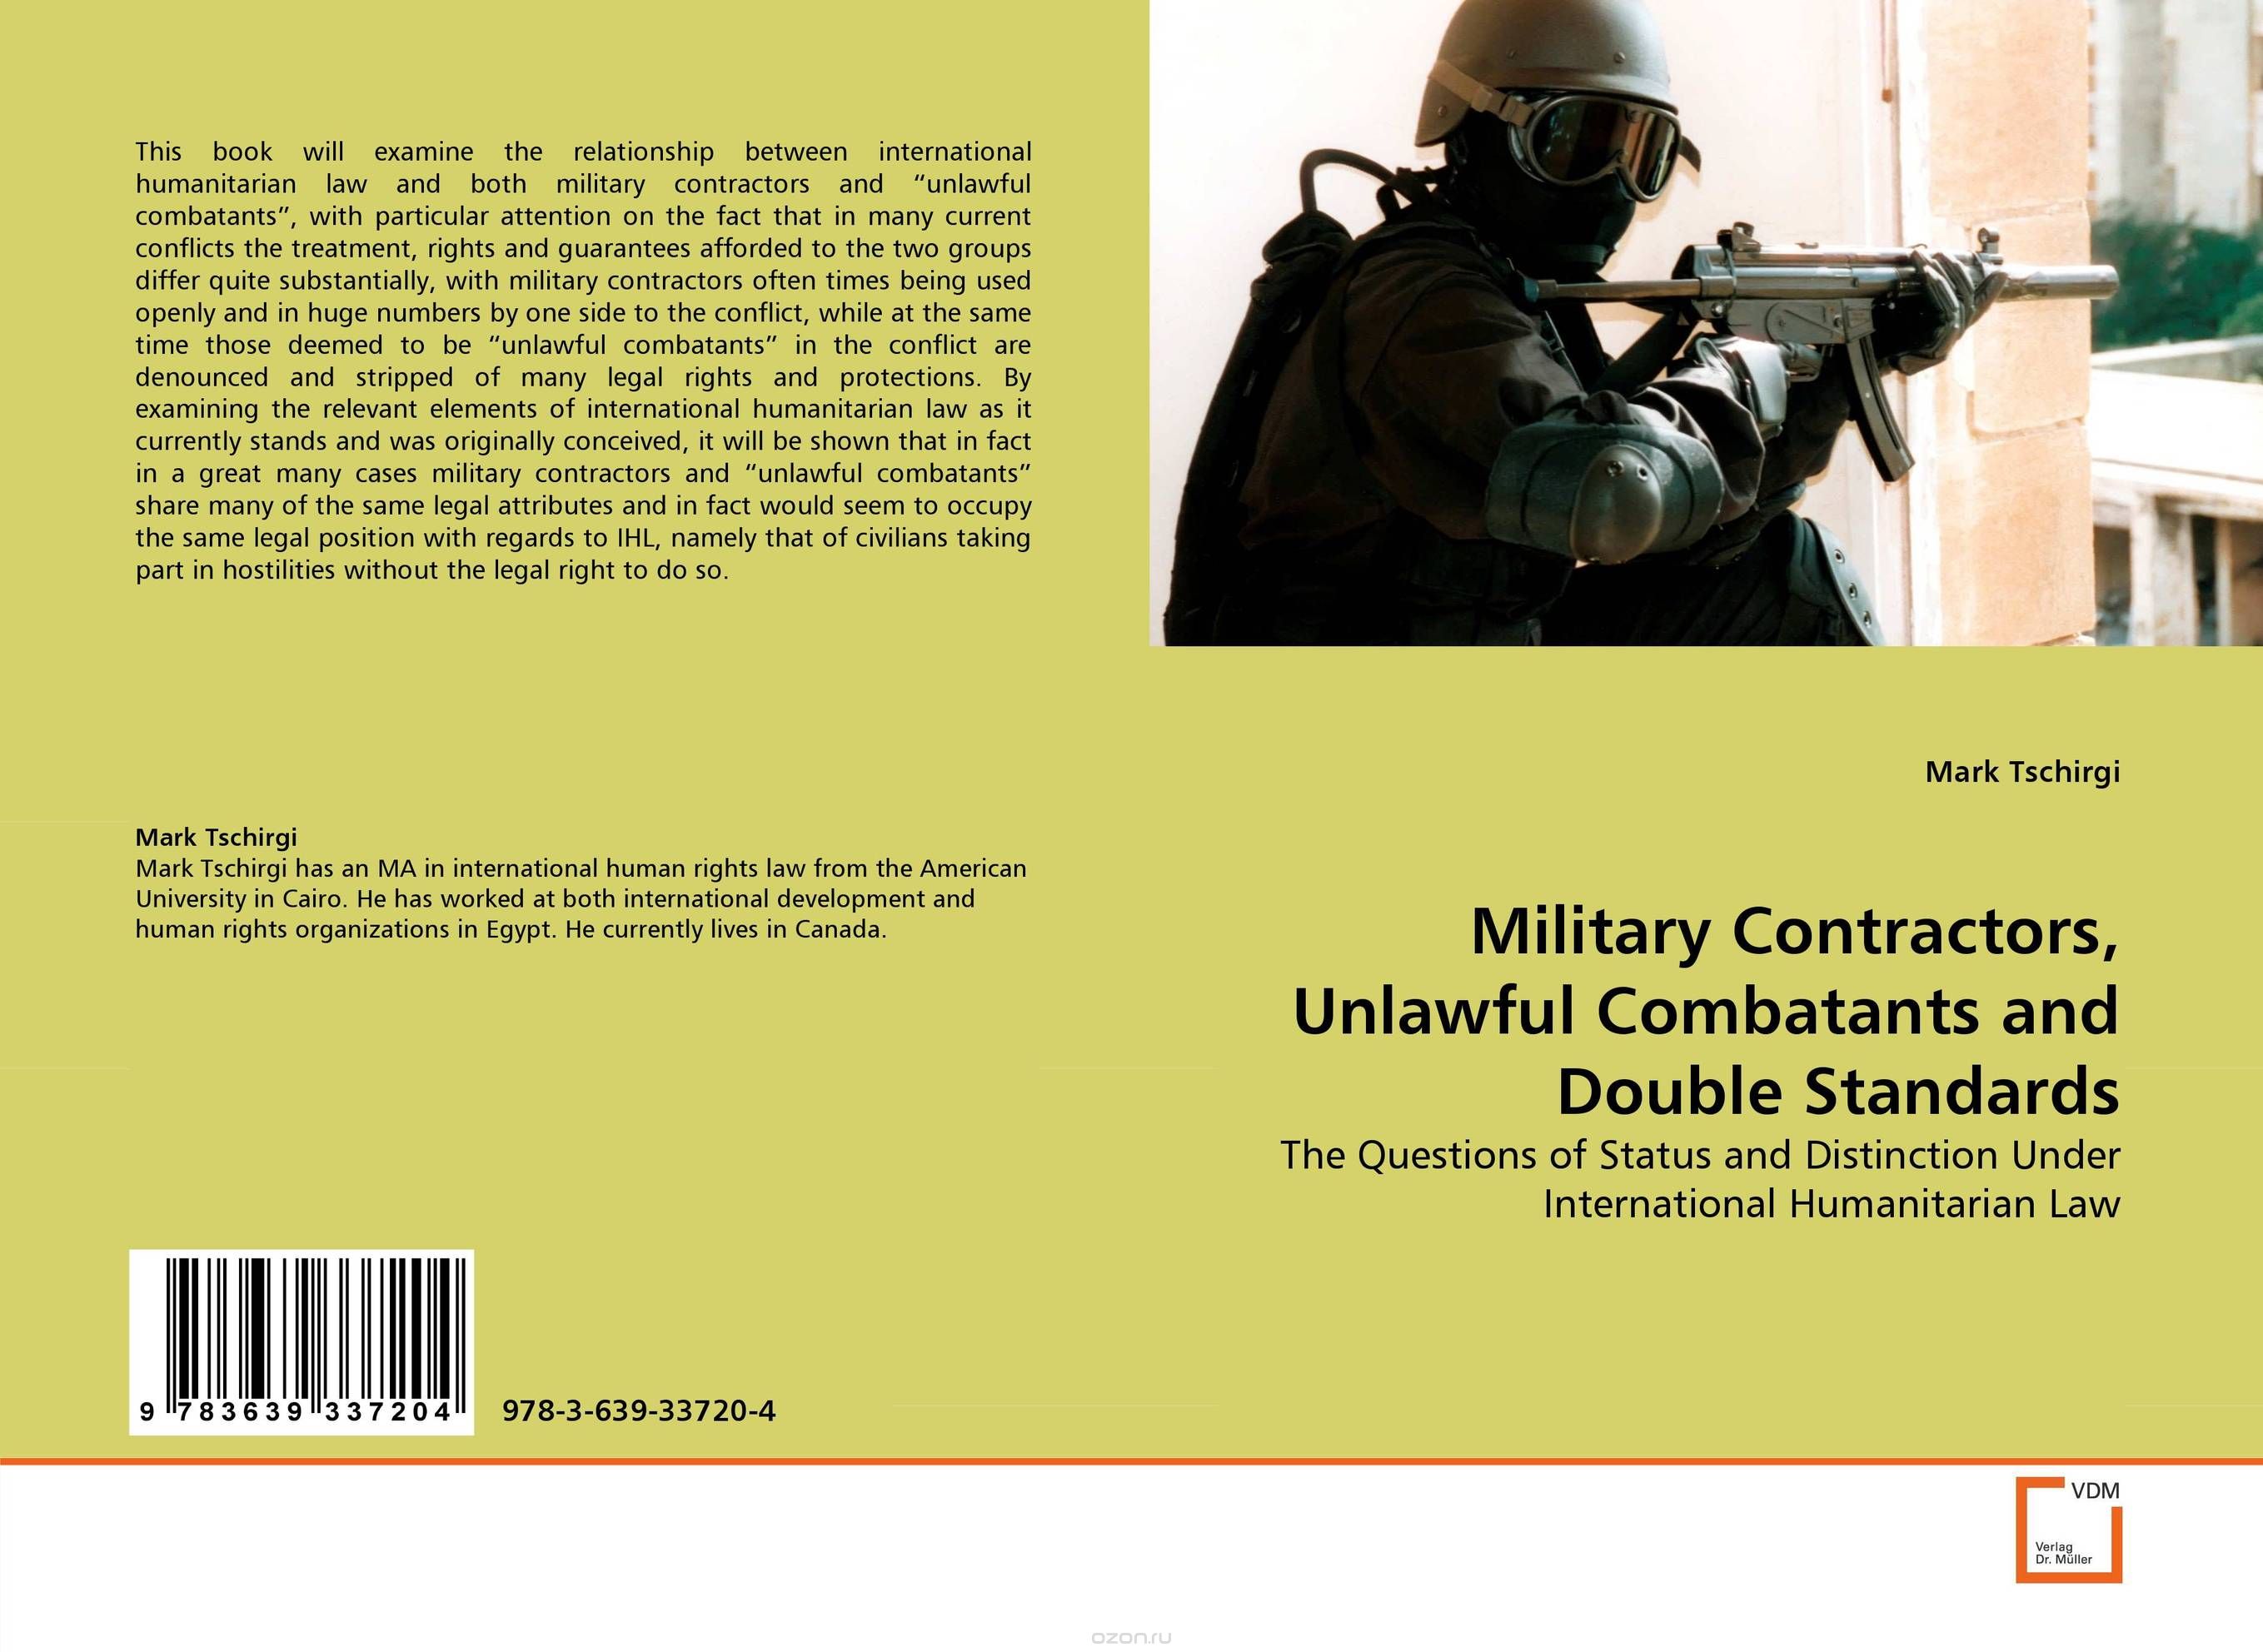 Military Contractors, Unlawful Combatants and Double Standards